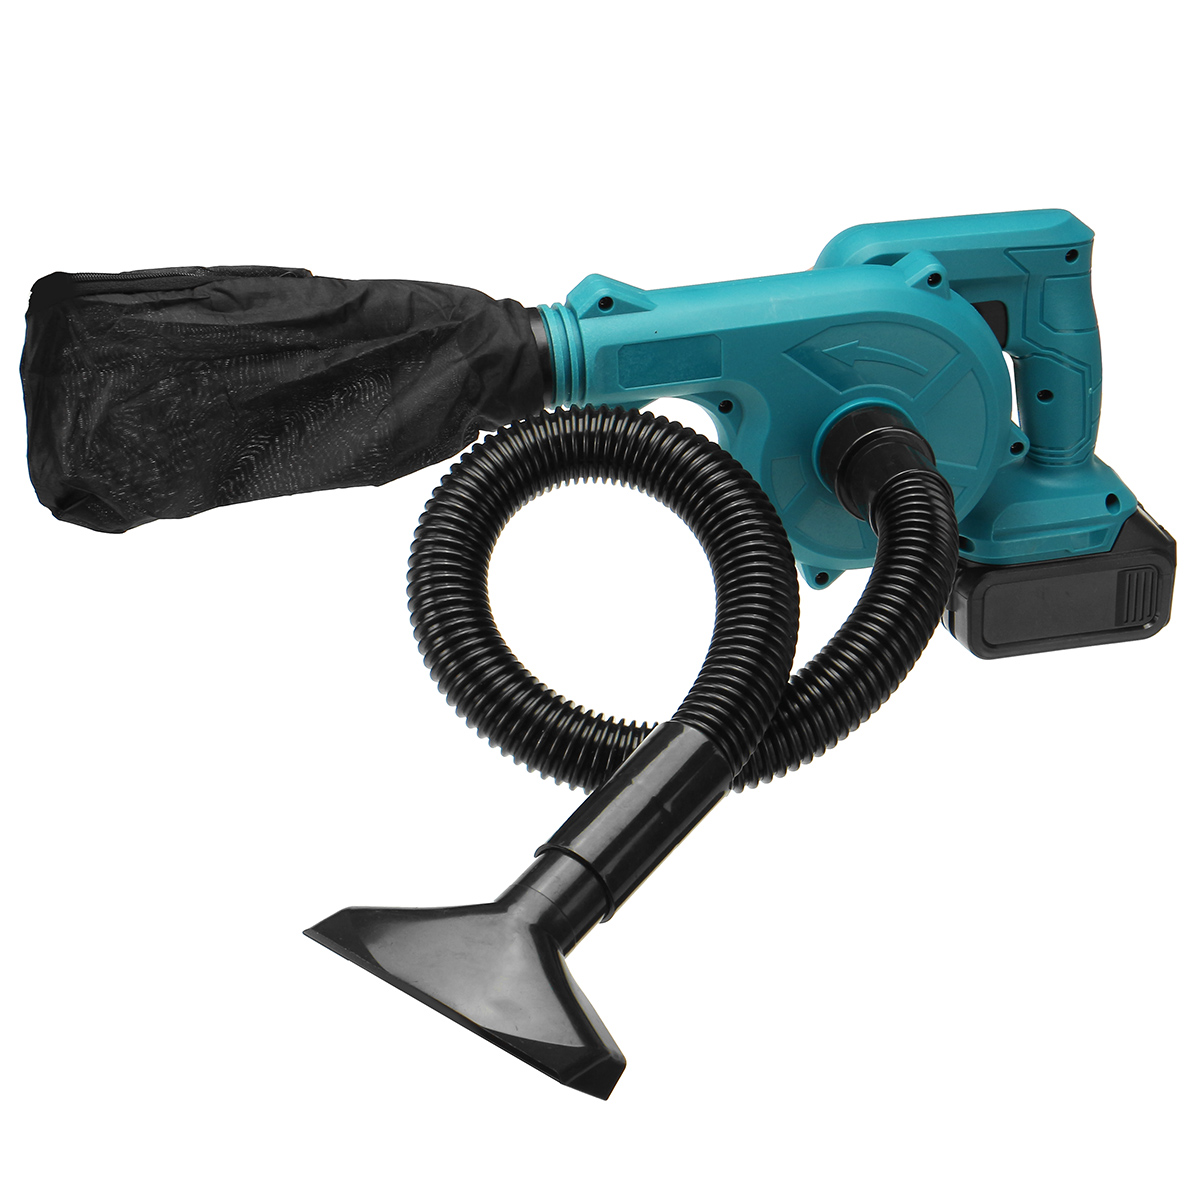 2-in-1-Electric-Air-Blower-Vacuum-Cleaner-Handheld-Dust-Collecting-Tool-For-Makita-18V-Battery-1771460-9